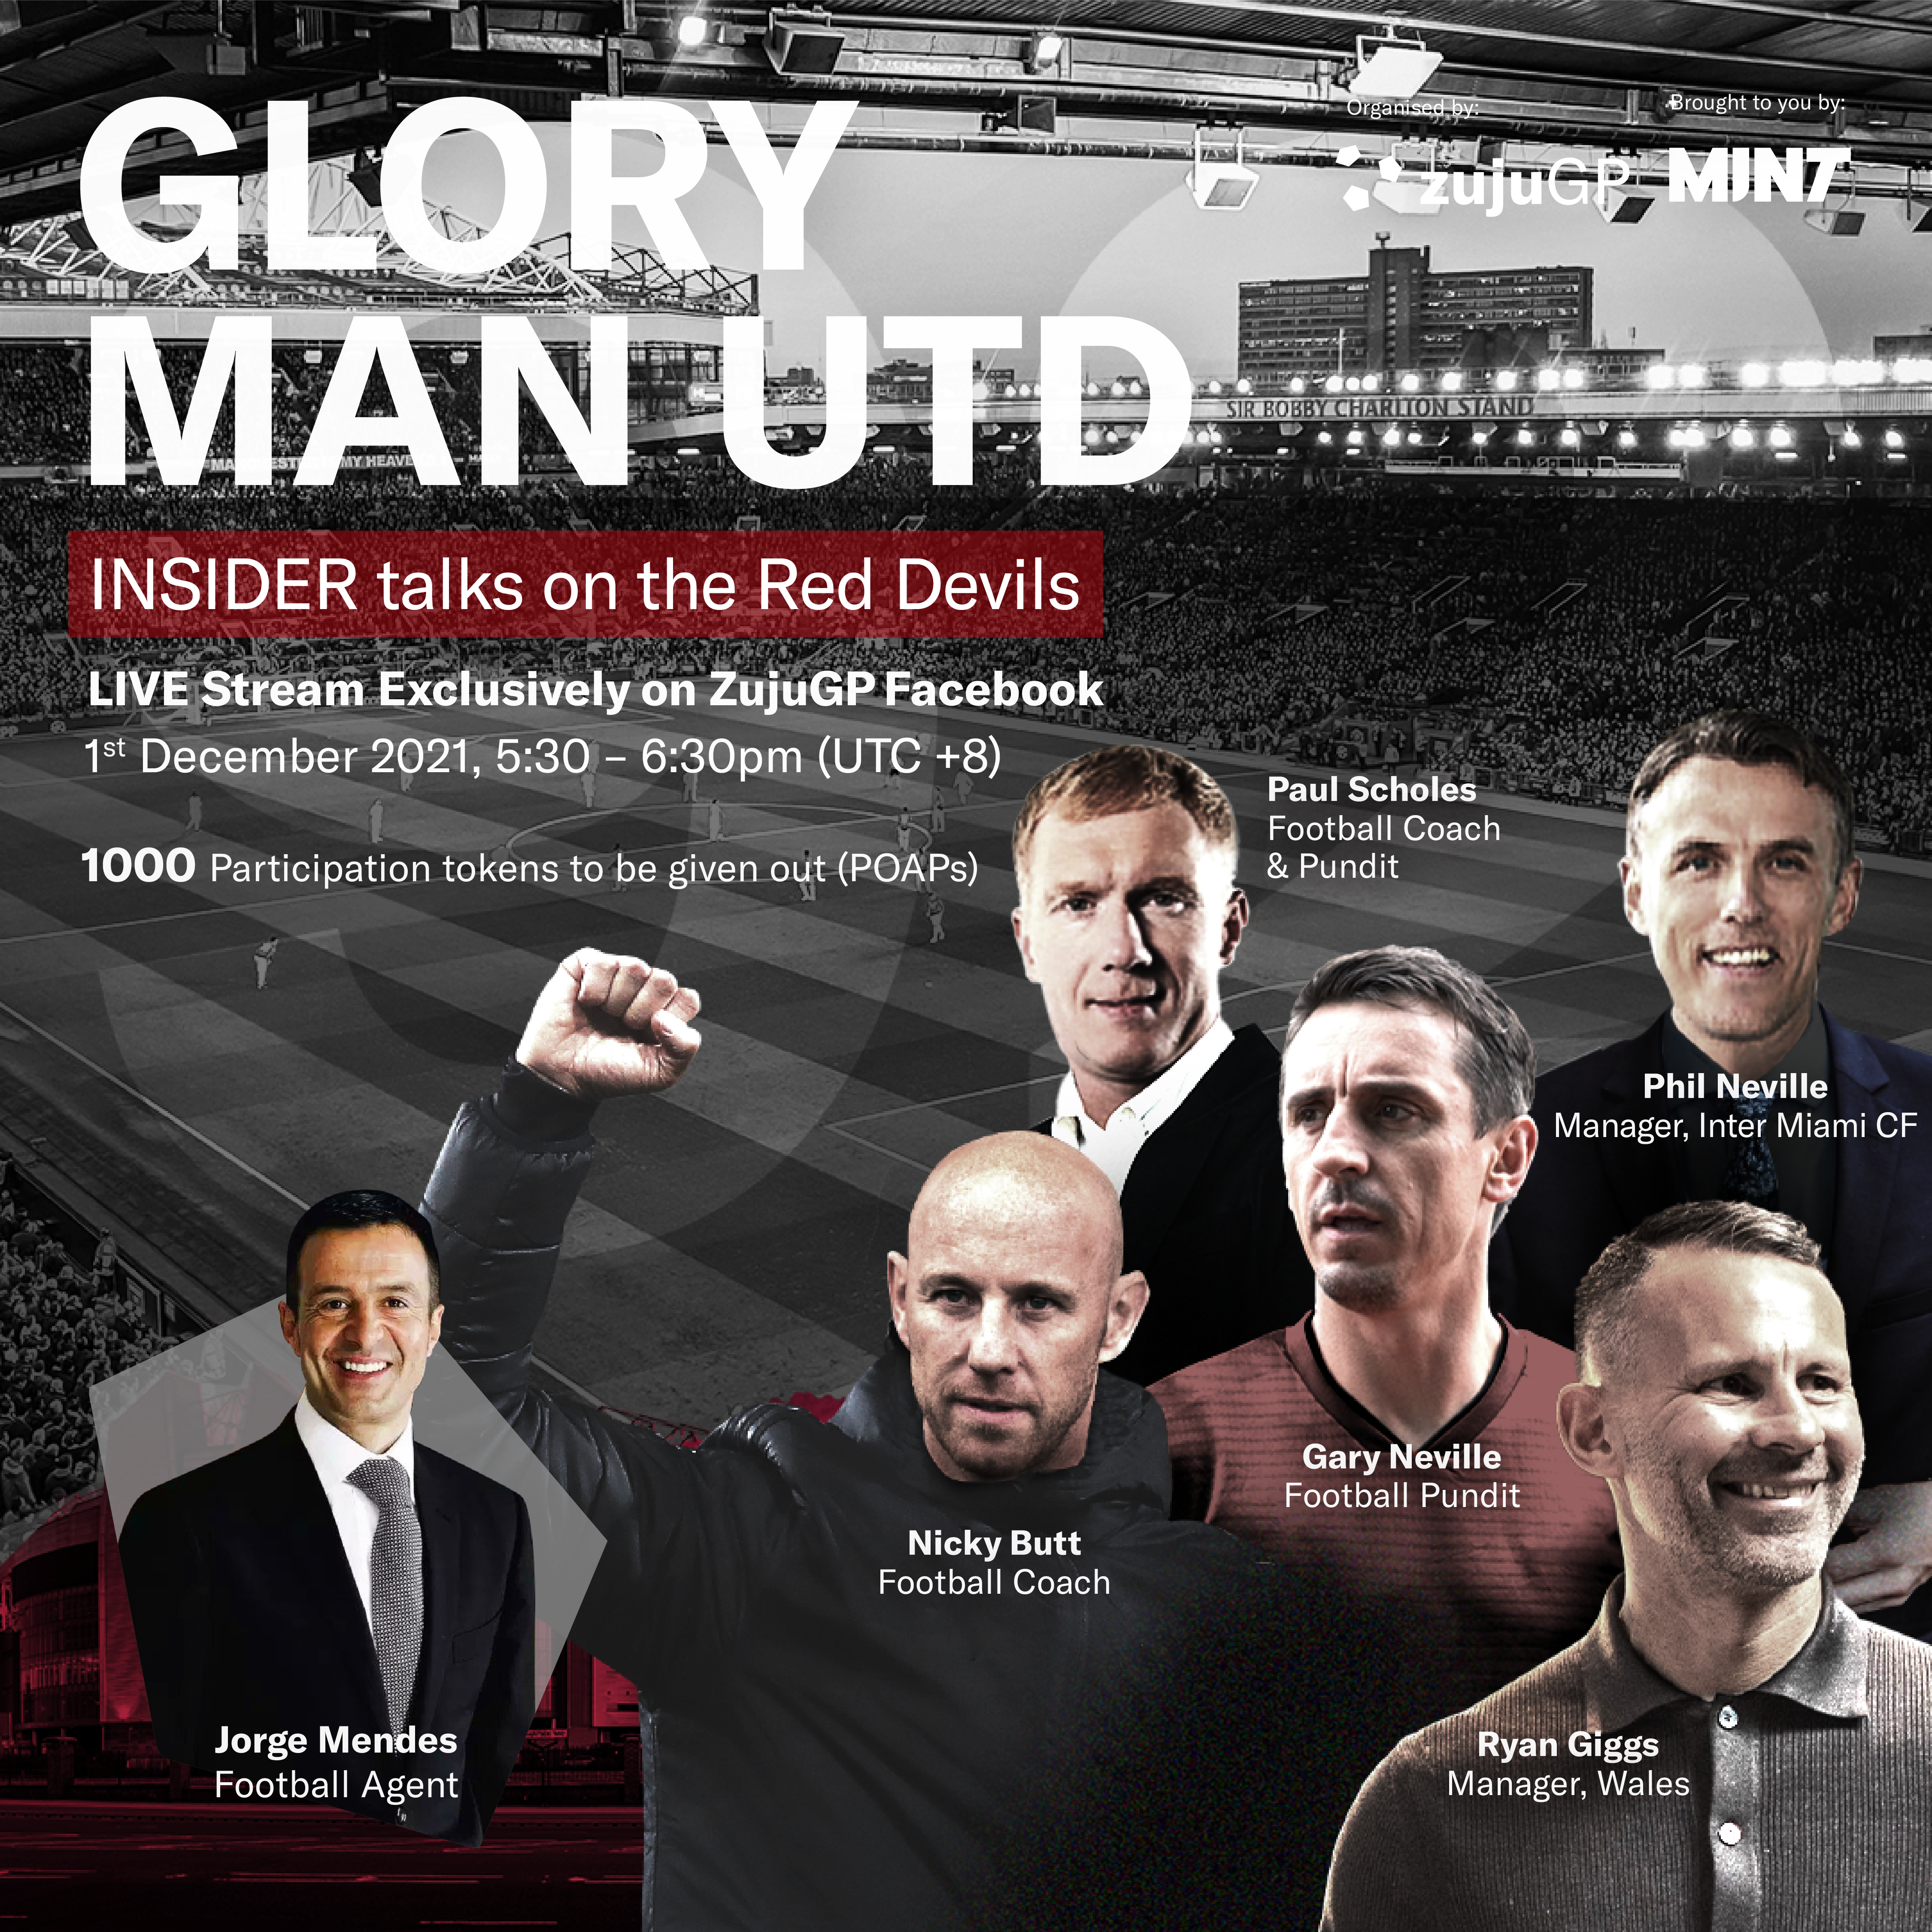 ZujuGP livestream events with Class of 92 Manchester United legends